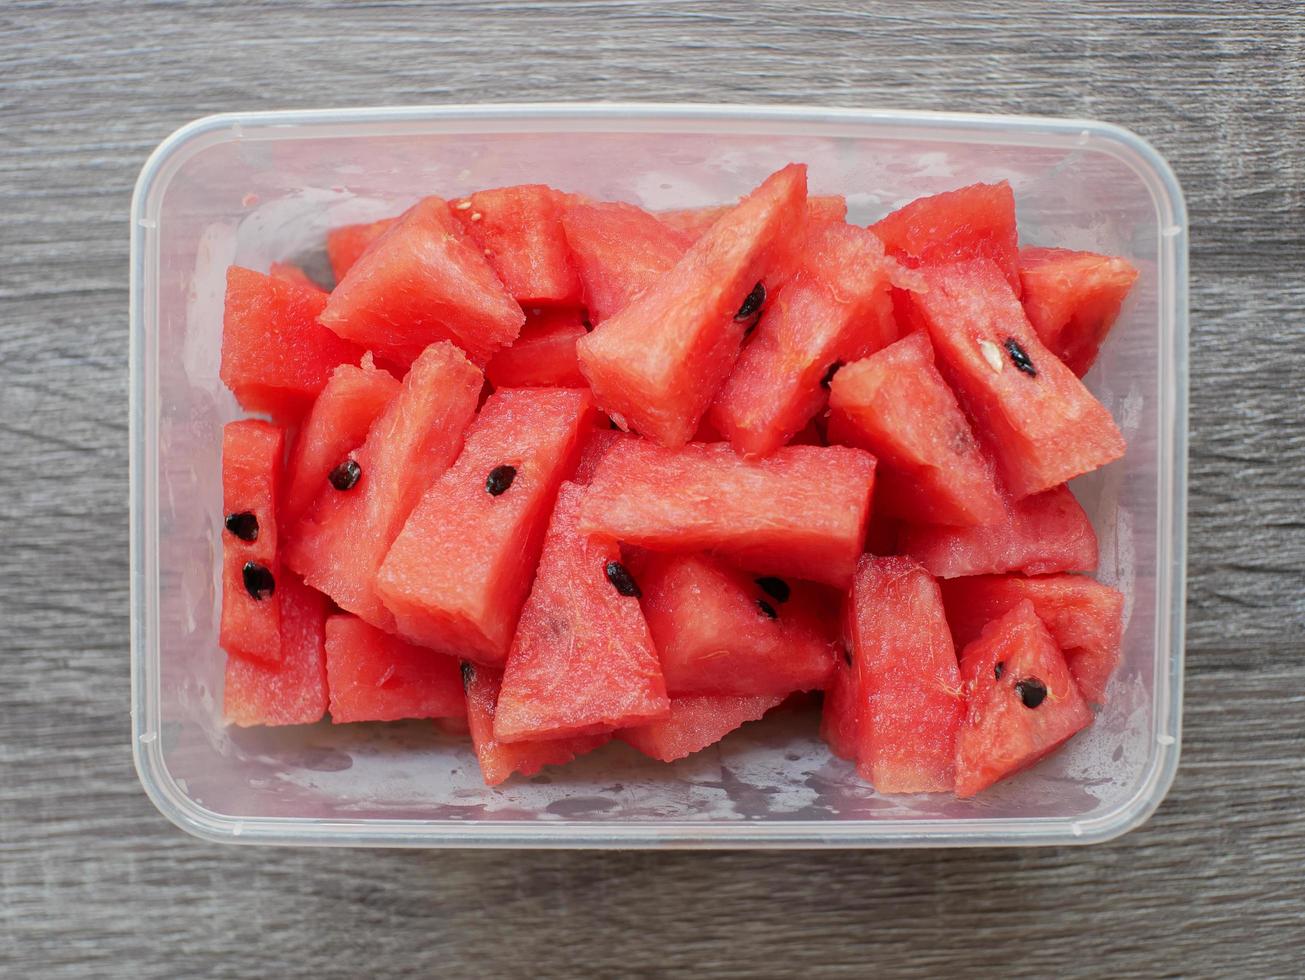 sliced fresh watermelon in a transparent container. healthy food and diet concept photo